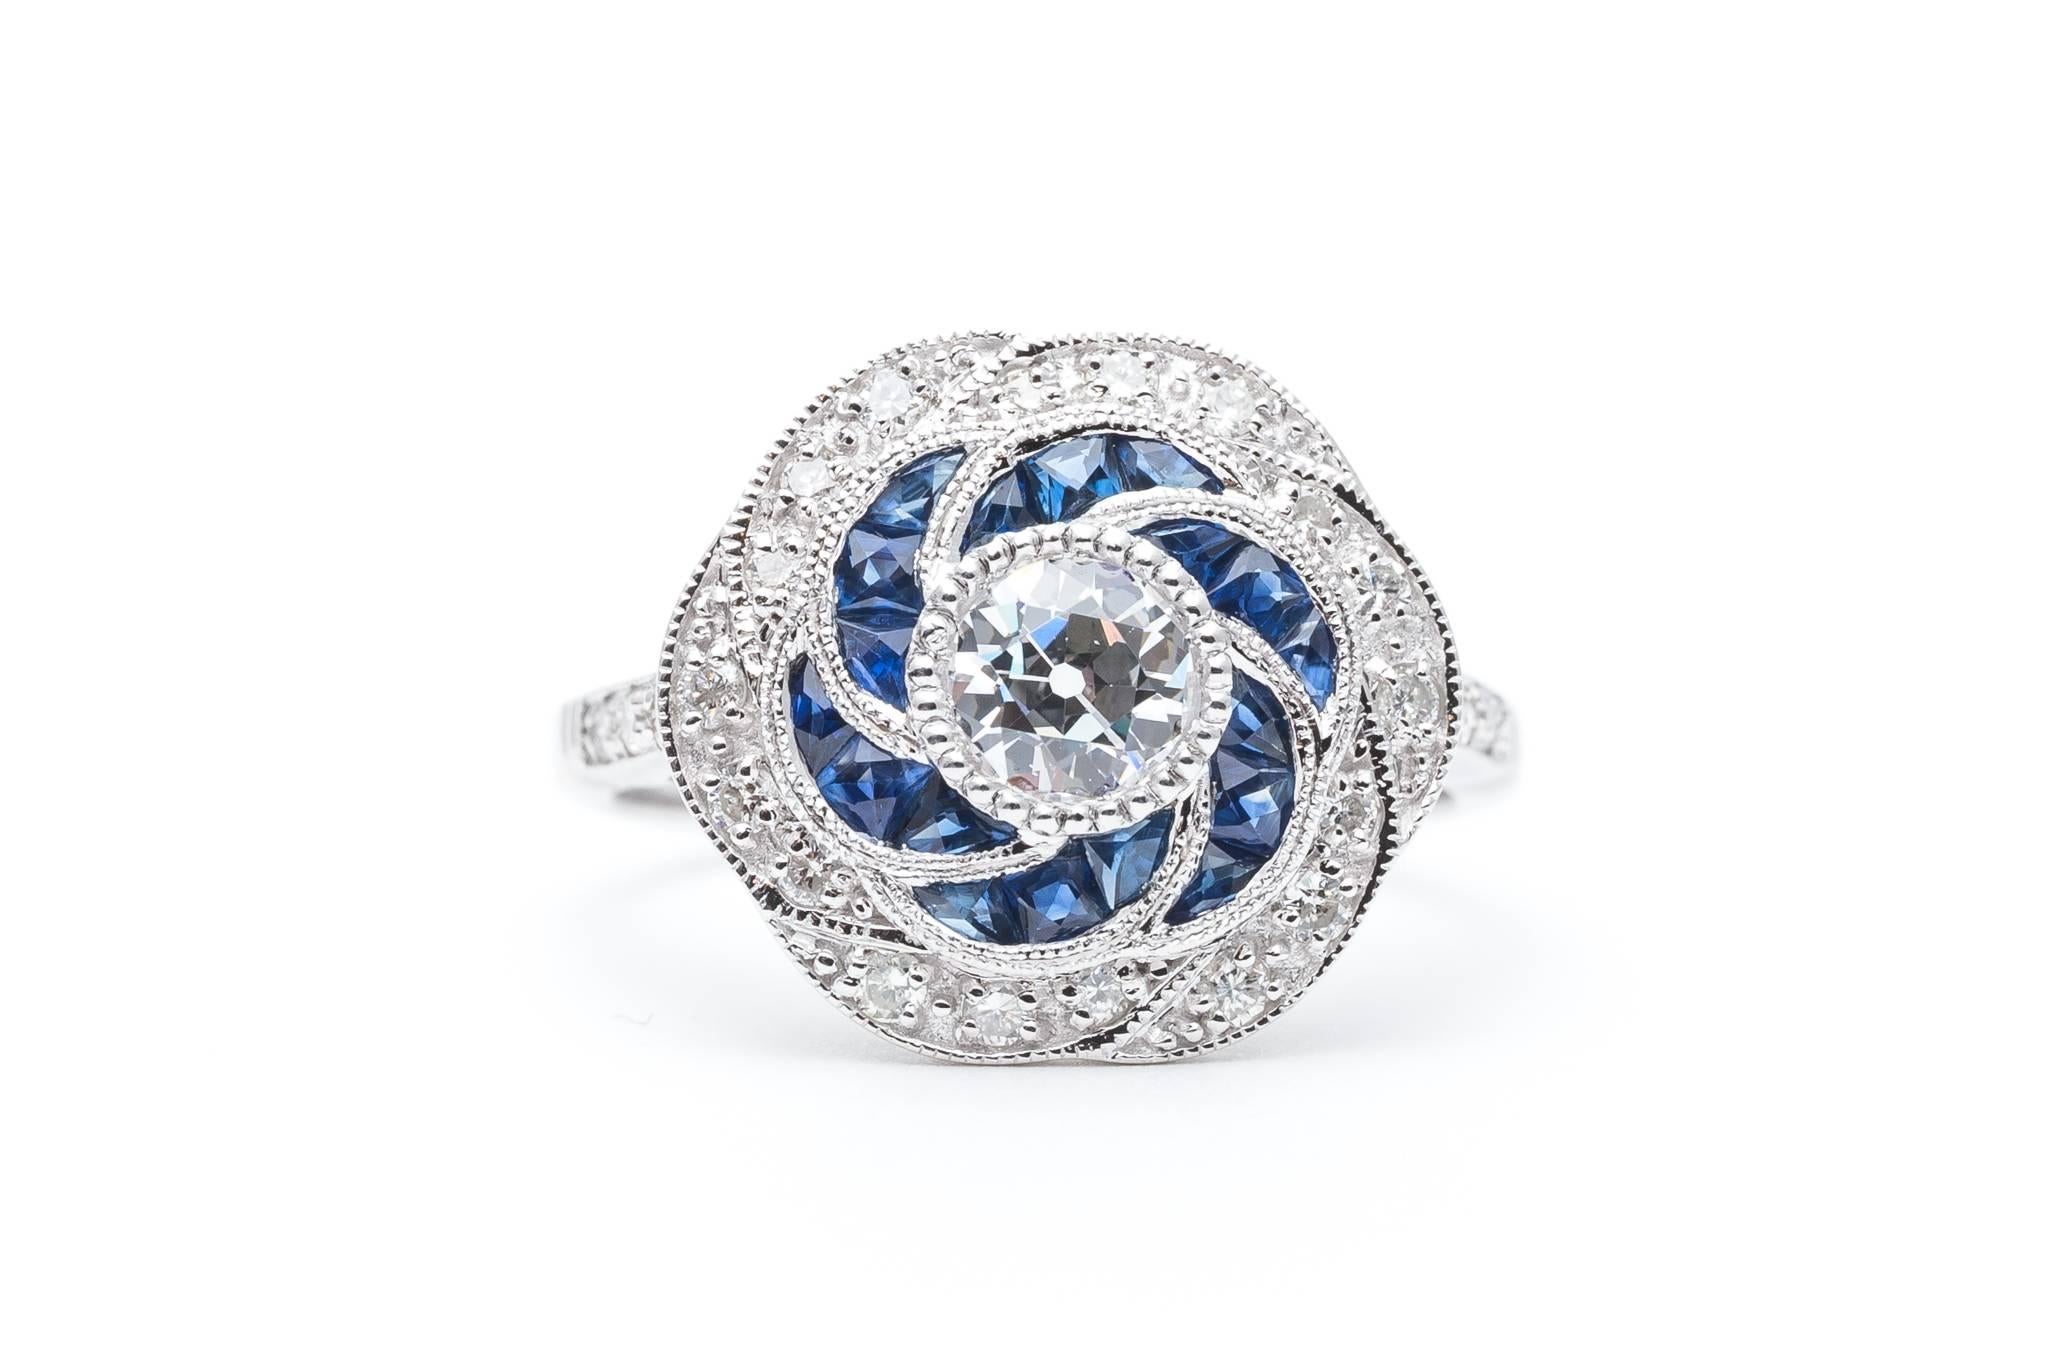 Beacon Hill Jewelers Presents:

A beautiful vintage floral inspired diamond and sapphire engagement ring in 14 karat white gold. Centered by a sparkling bezel set old European cut diamond this ring features flower petals of French cut sapphires